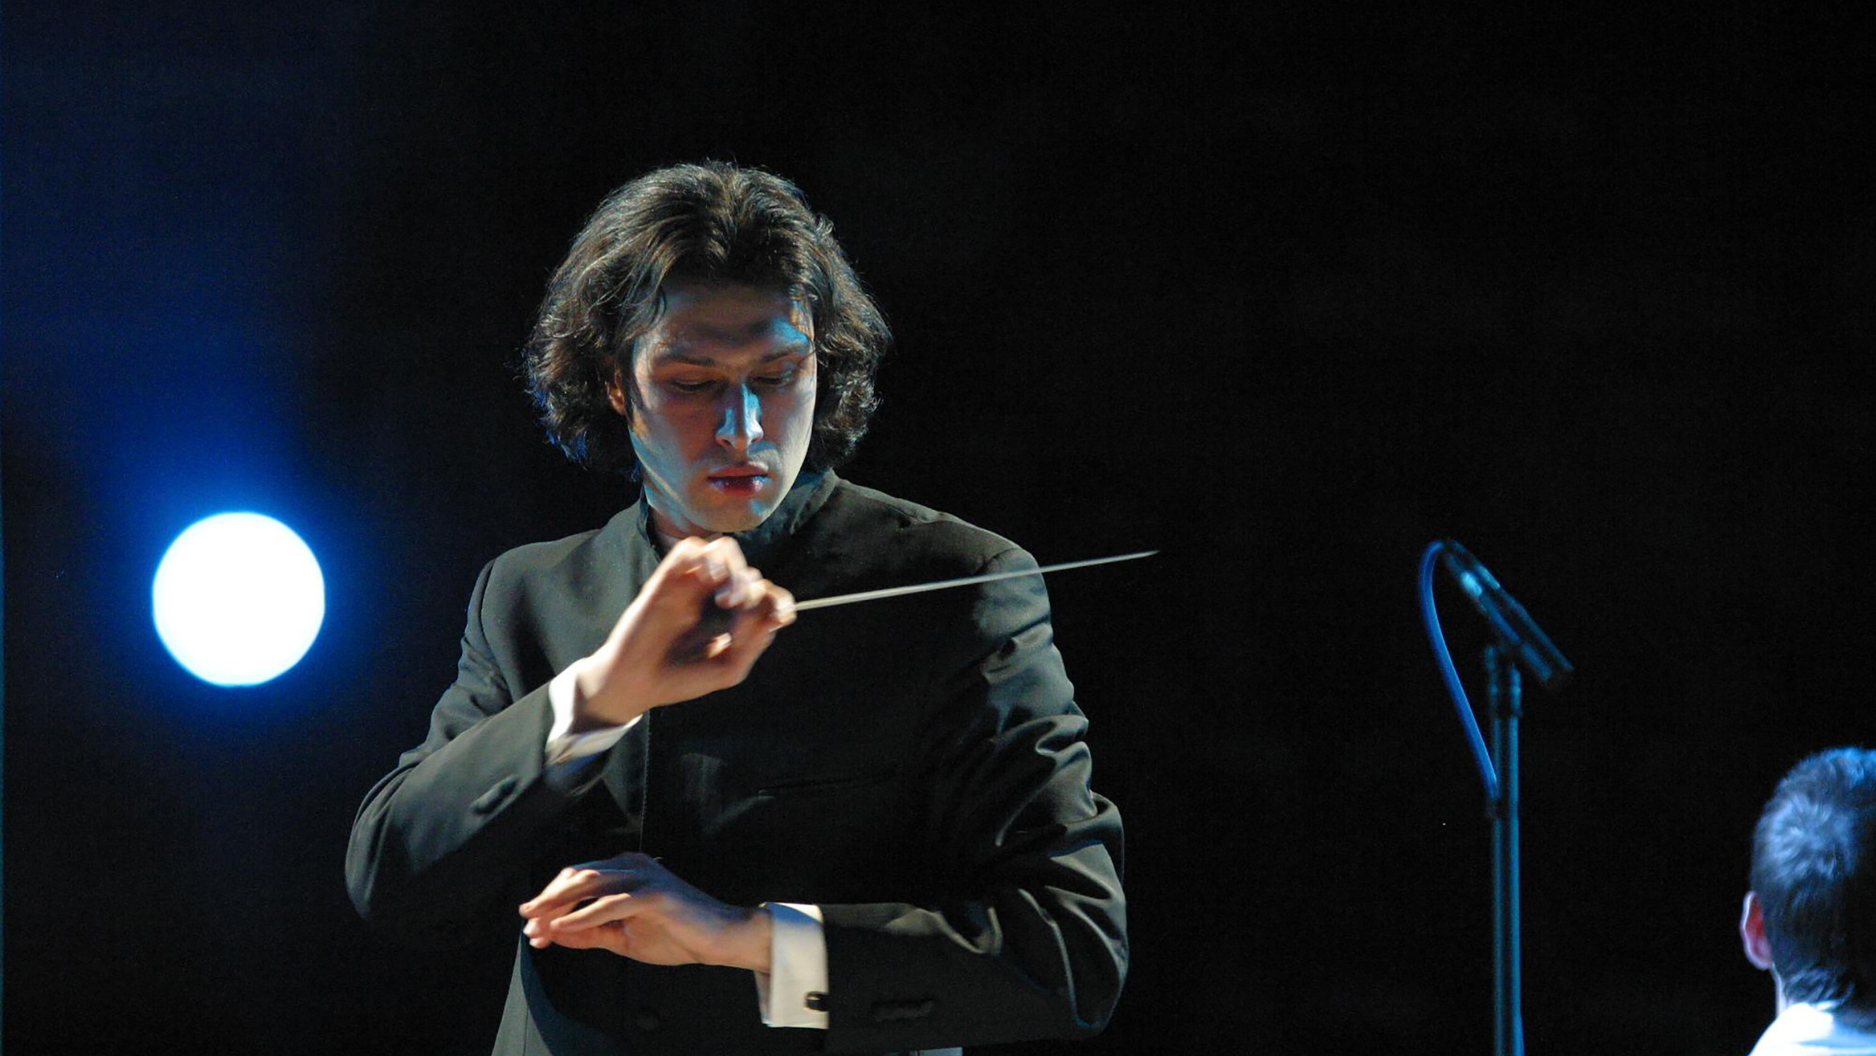 Conductor Vladimir Jurowski looks down at his music while conducting an orchestra, his hands are crossed in one hand he holds his conductor's batton. He is wearing a traditional suit and the background is black except for a single spotlight